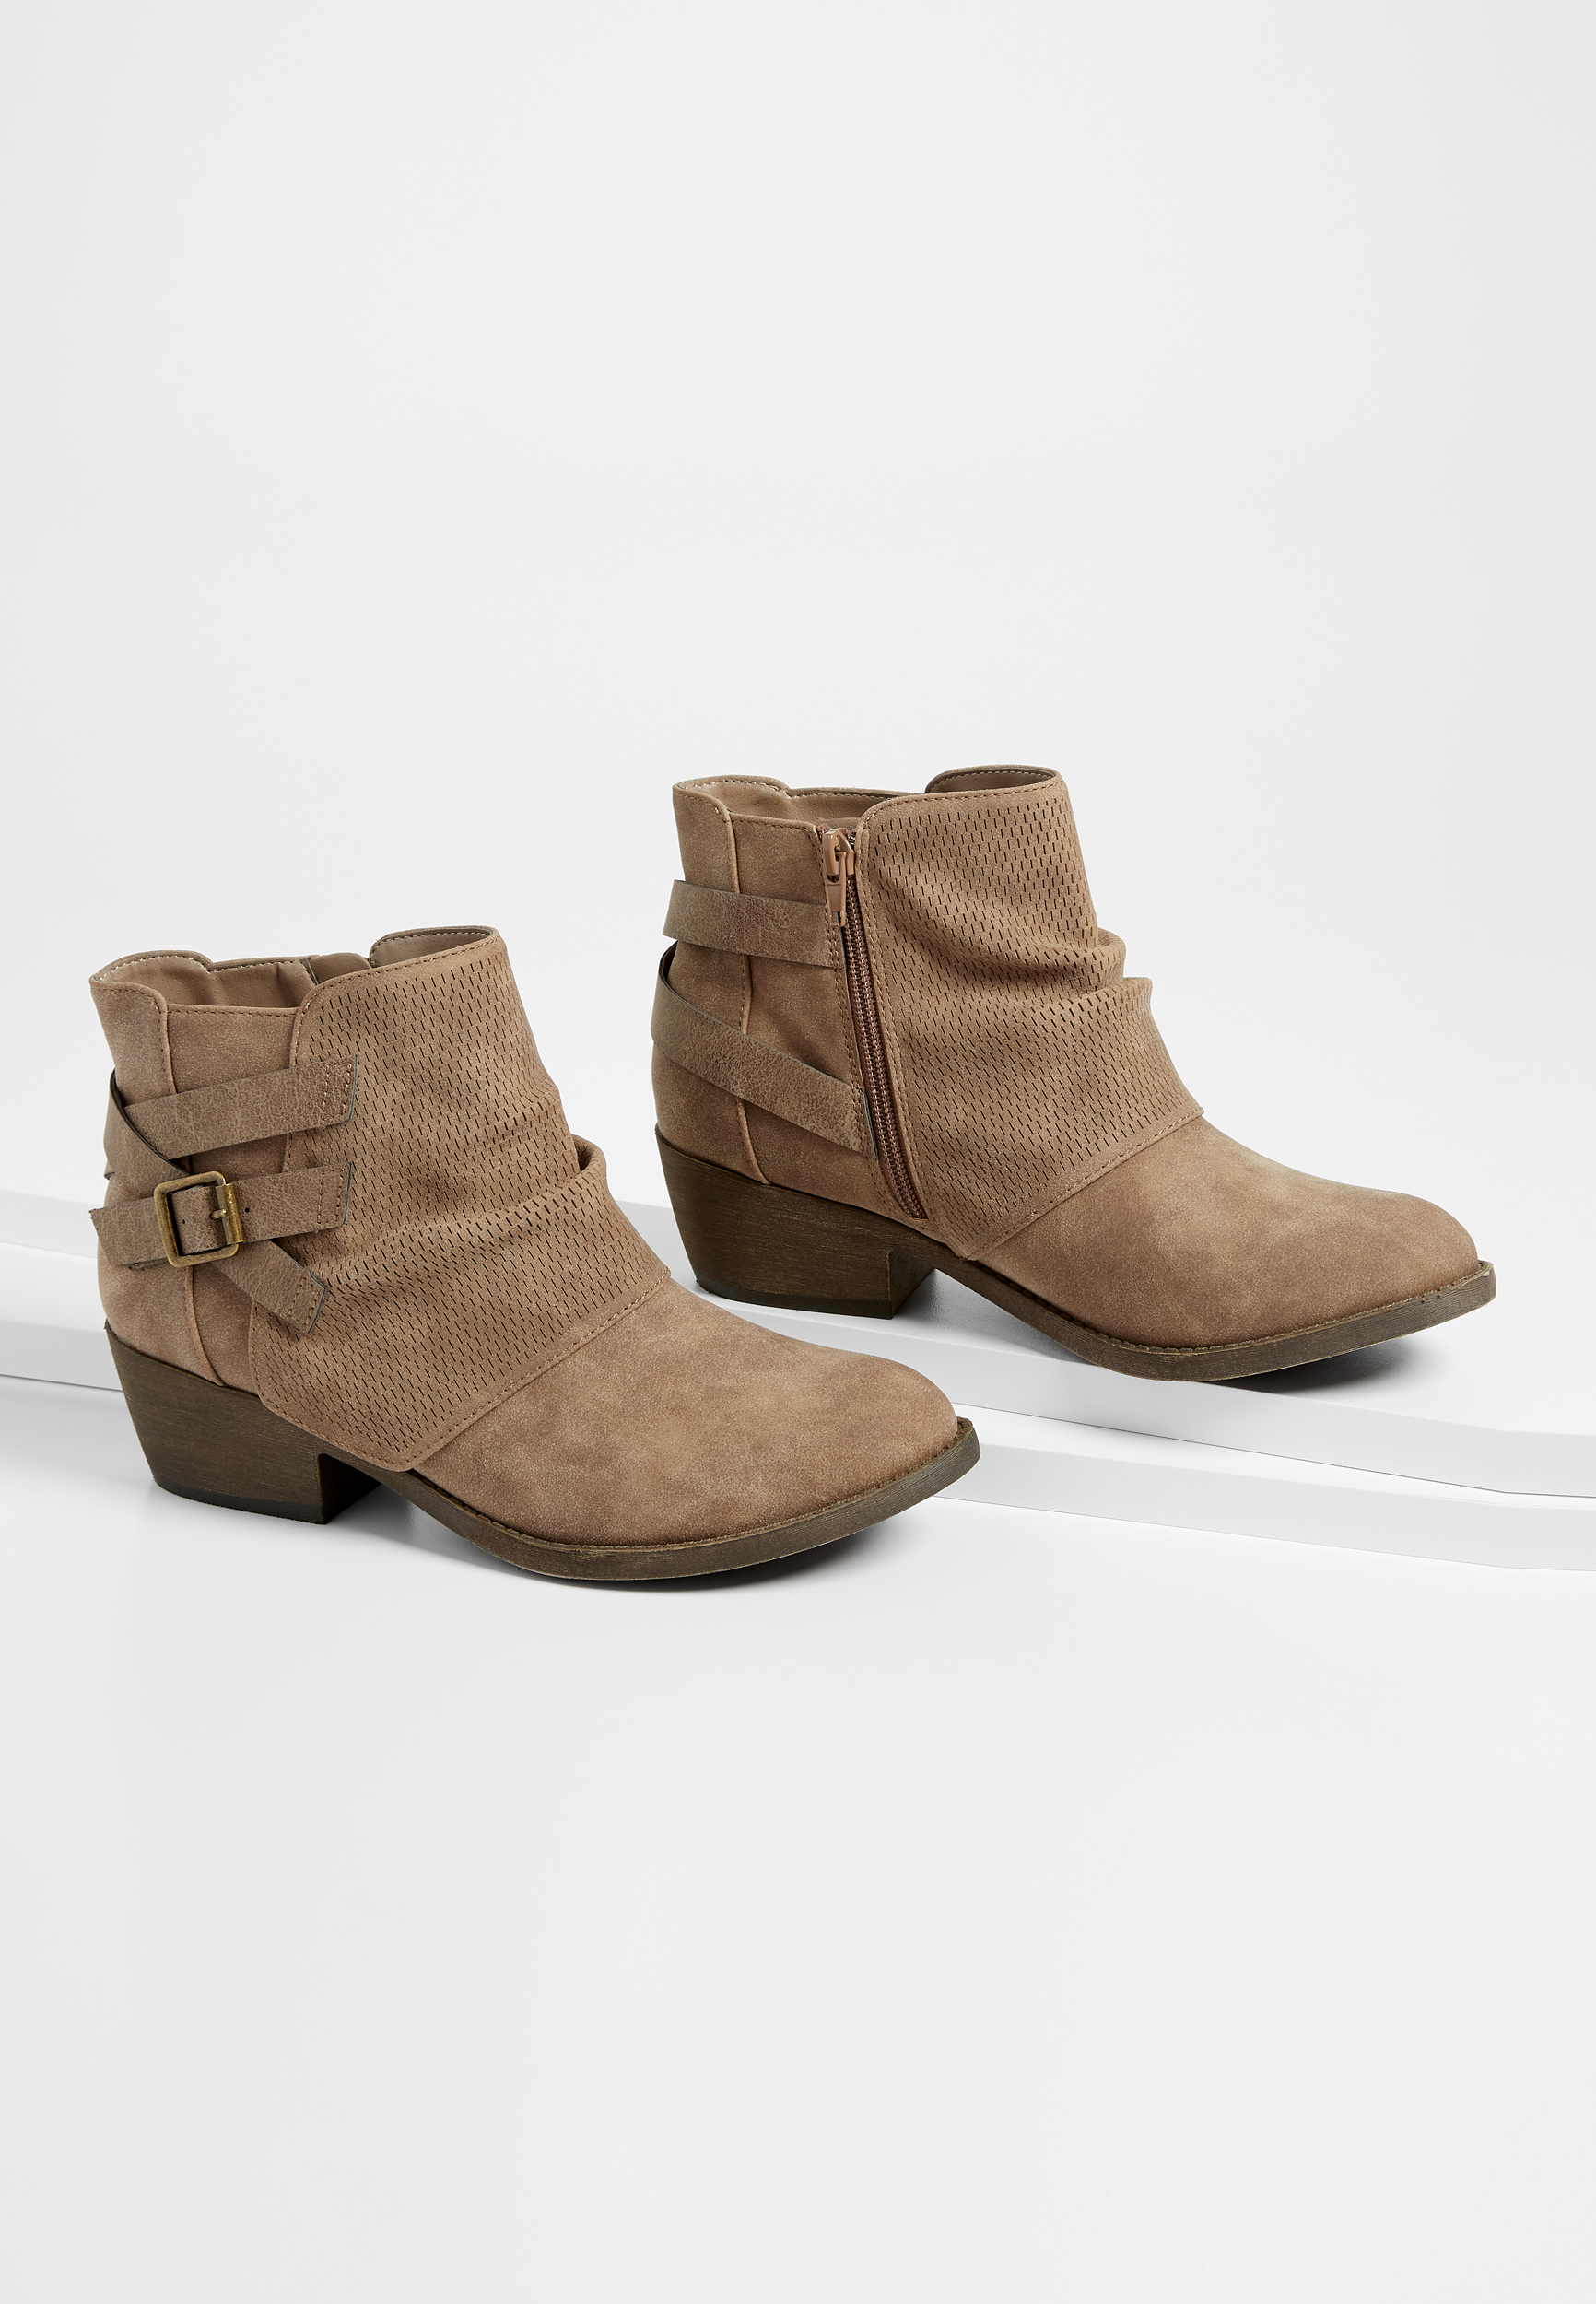 Raegan multi strap ankle bootie | maurices